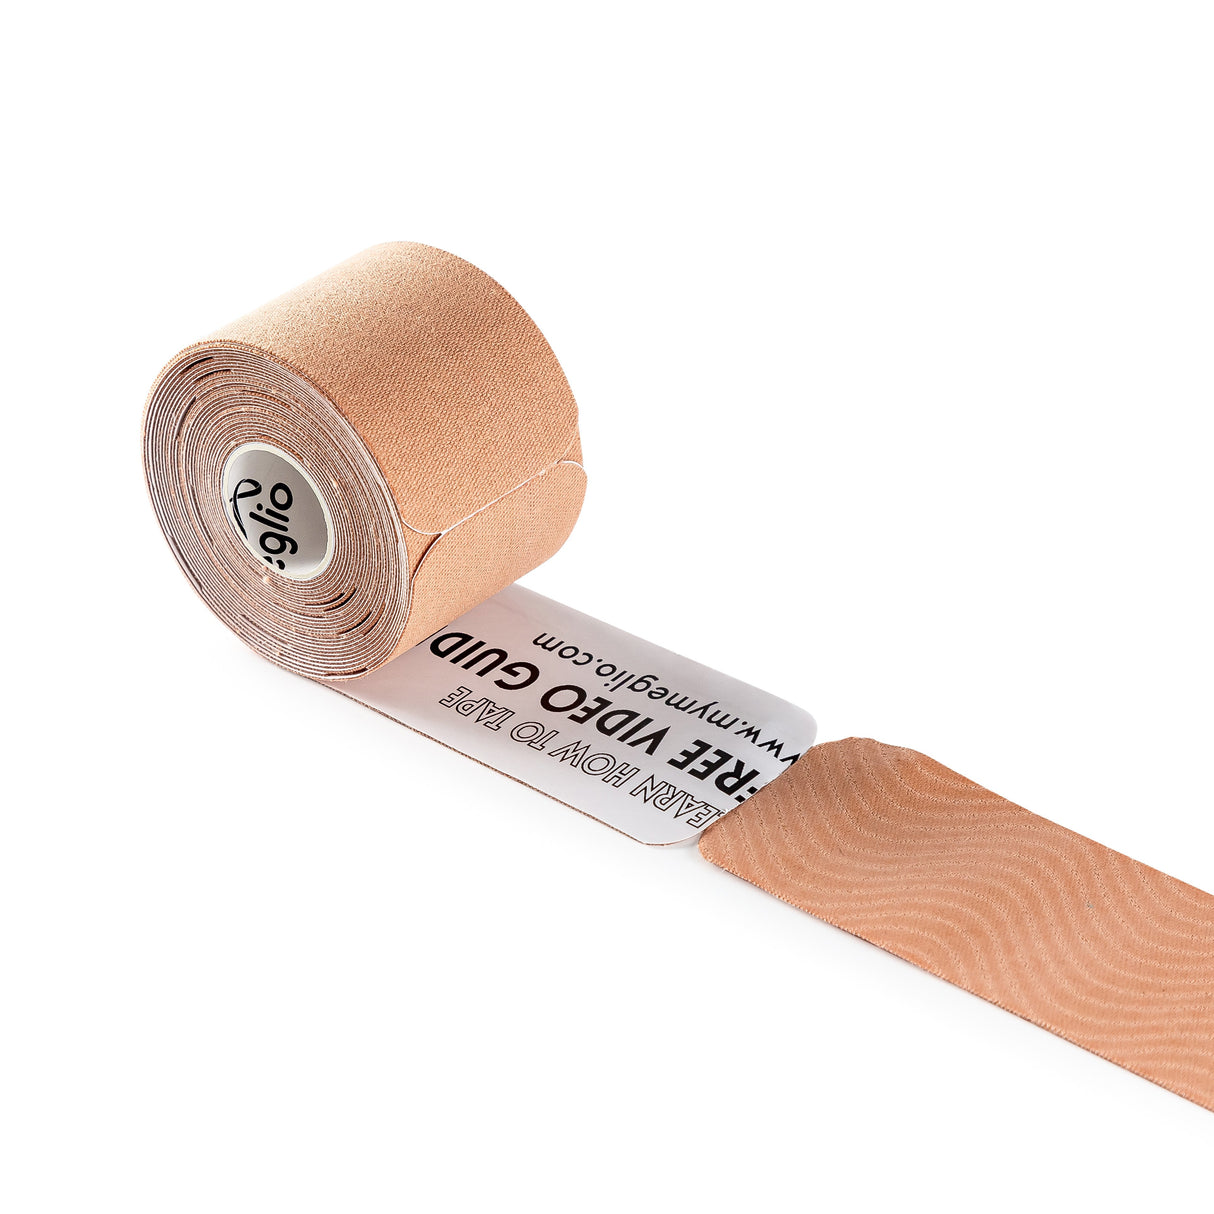 Kinesiology Tape 5m x 5cm. Pre-cut or Uncut Sports injury recovery, supports muscles tendons and ligaments